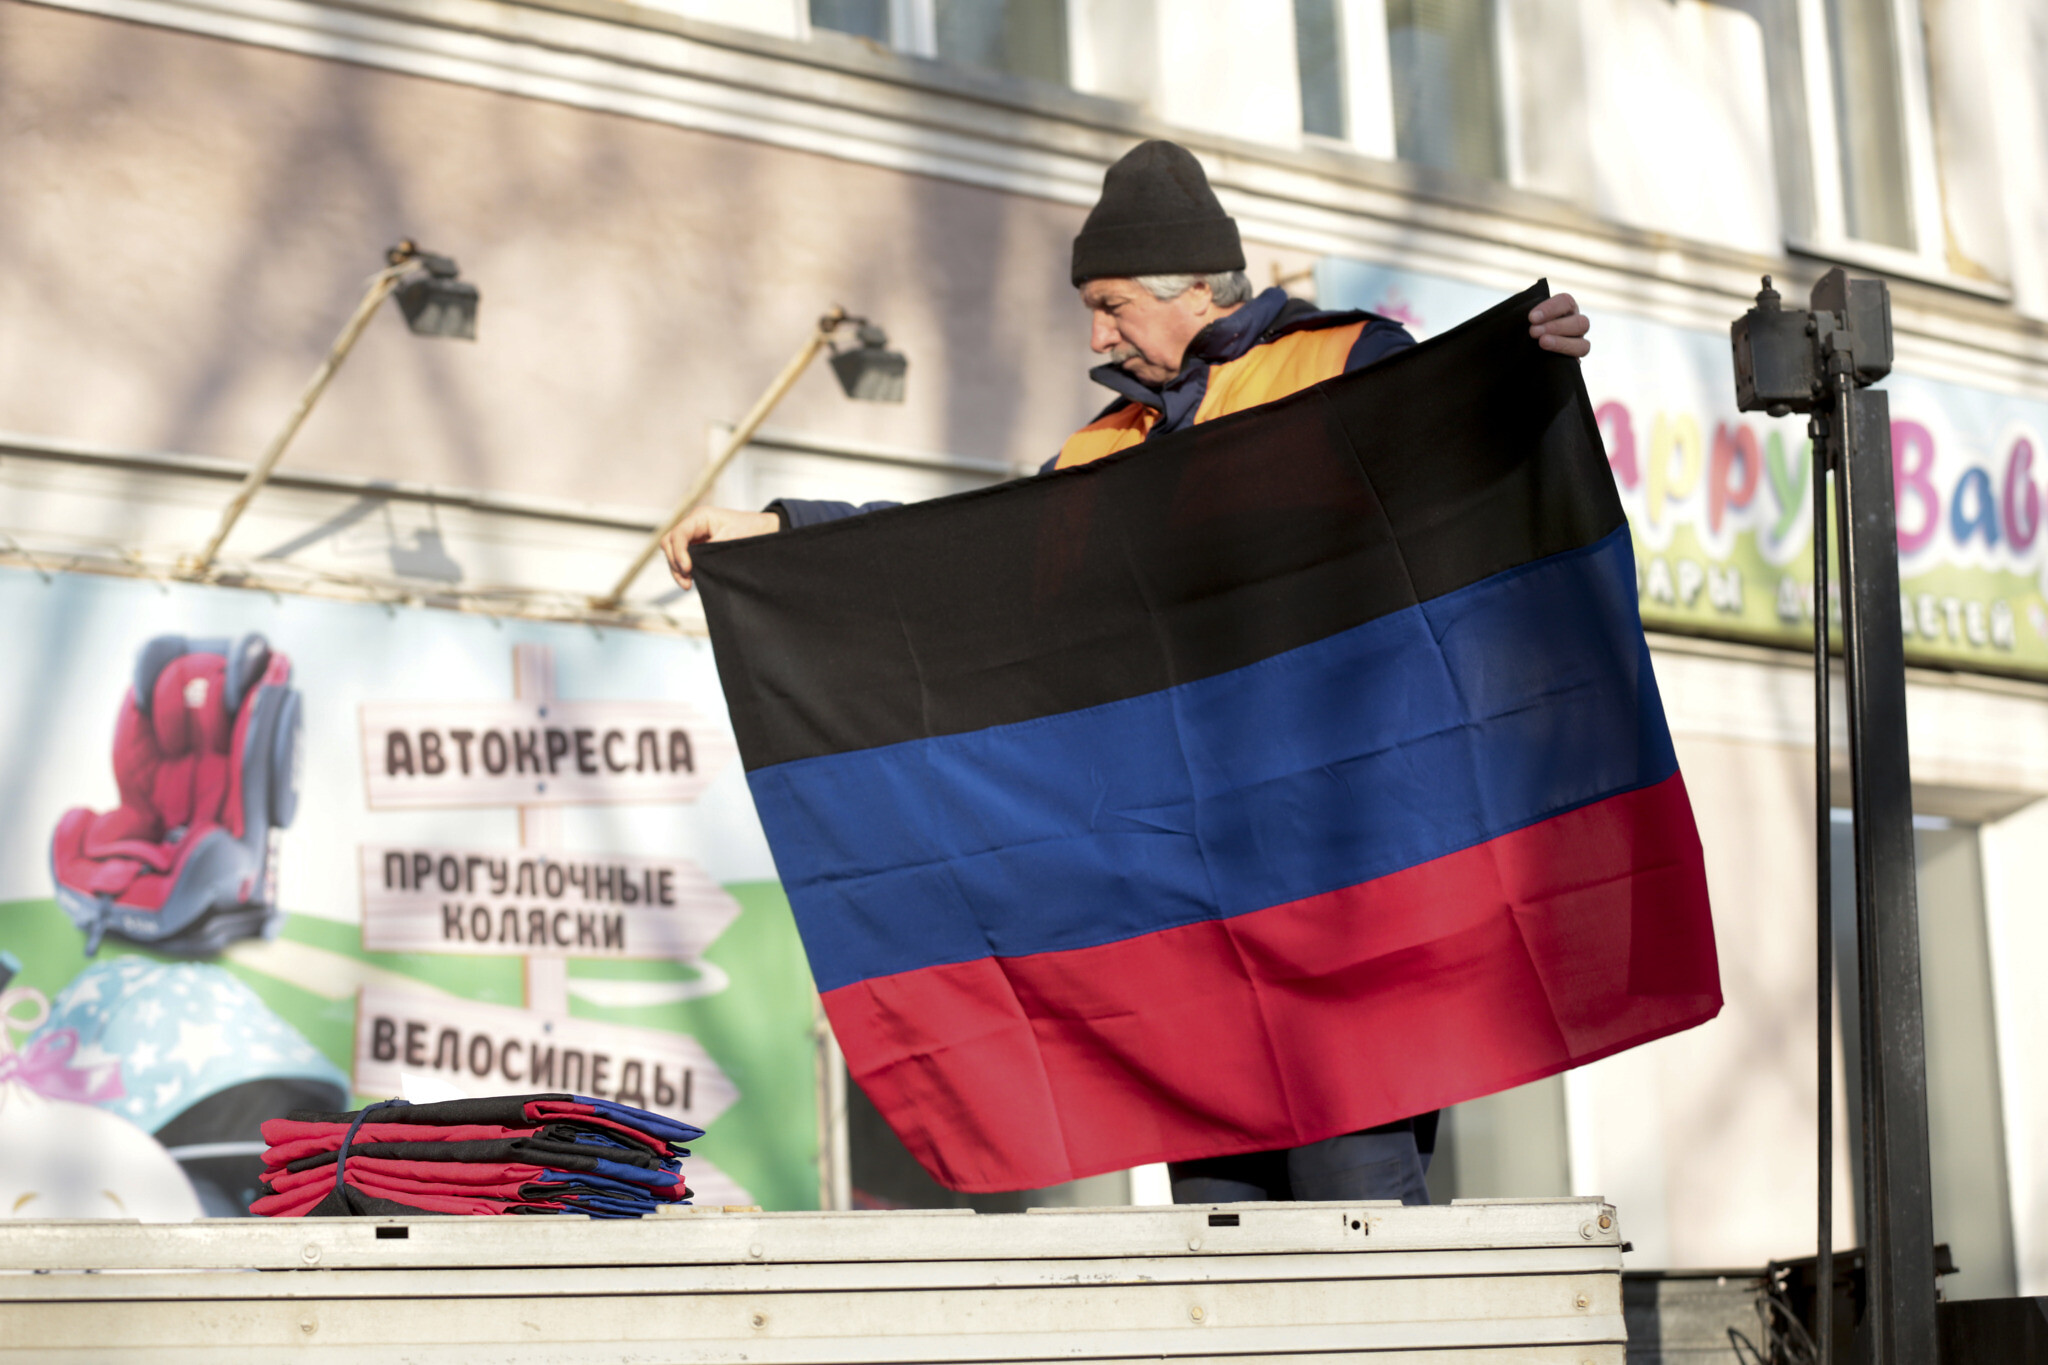 Donetsk People's Republic to open Moscow embassy